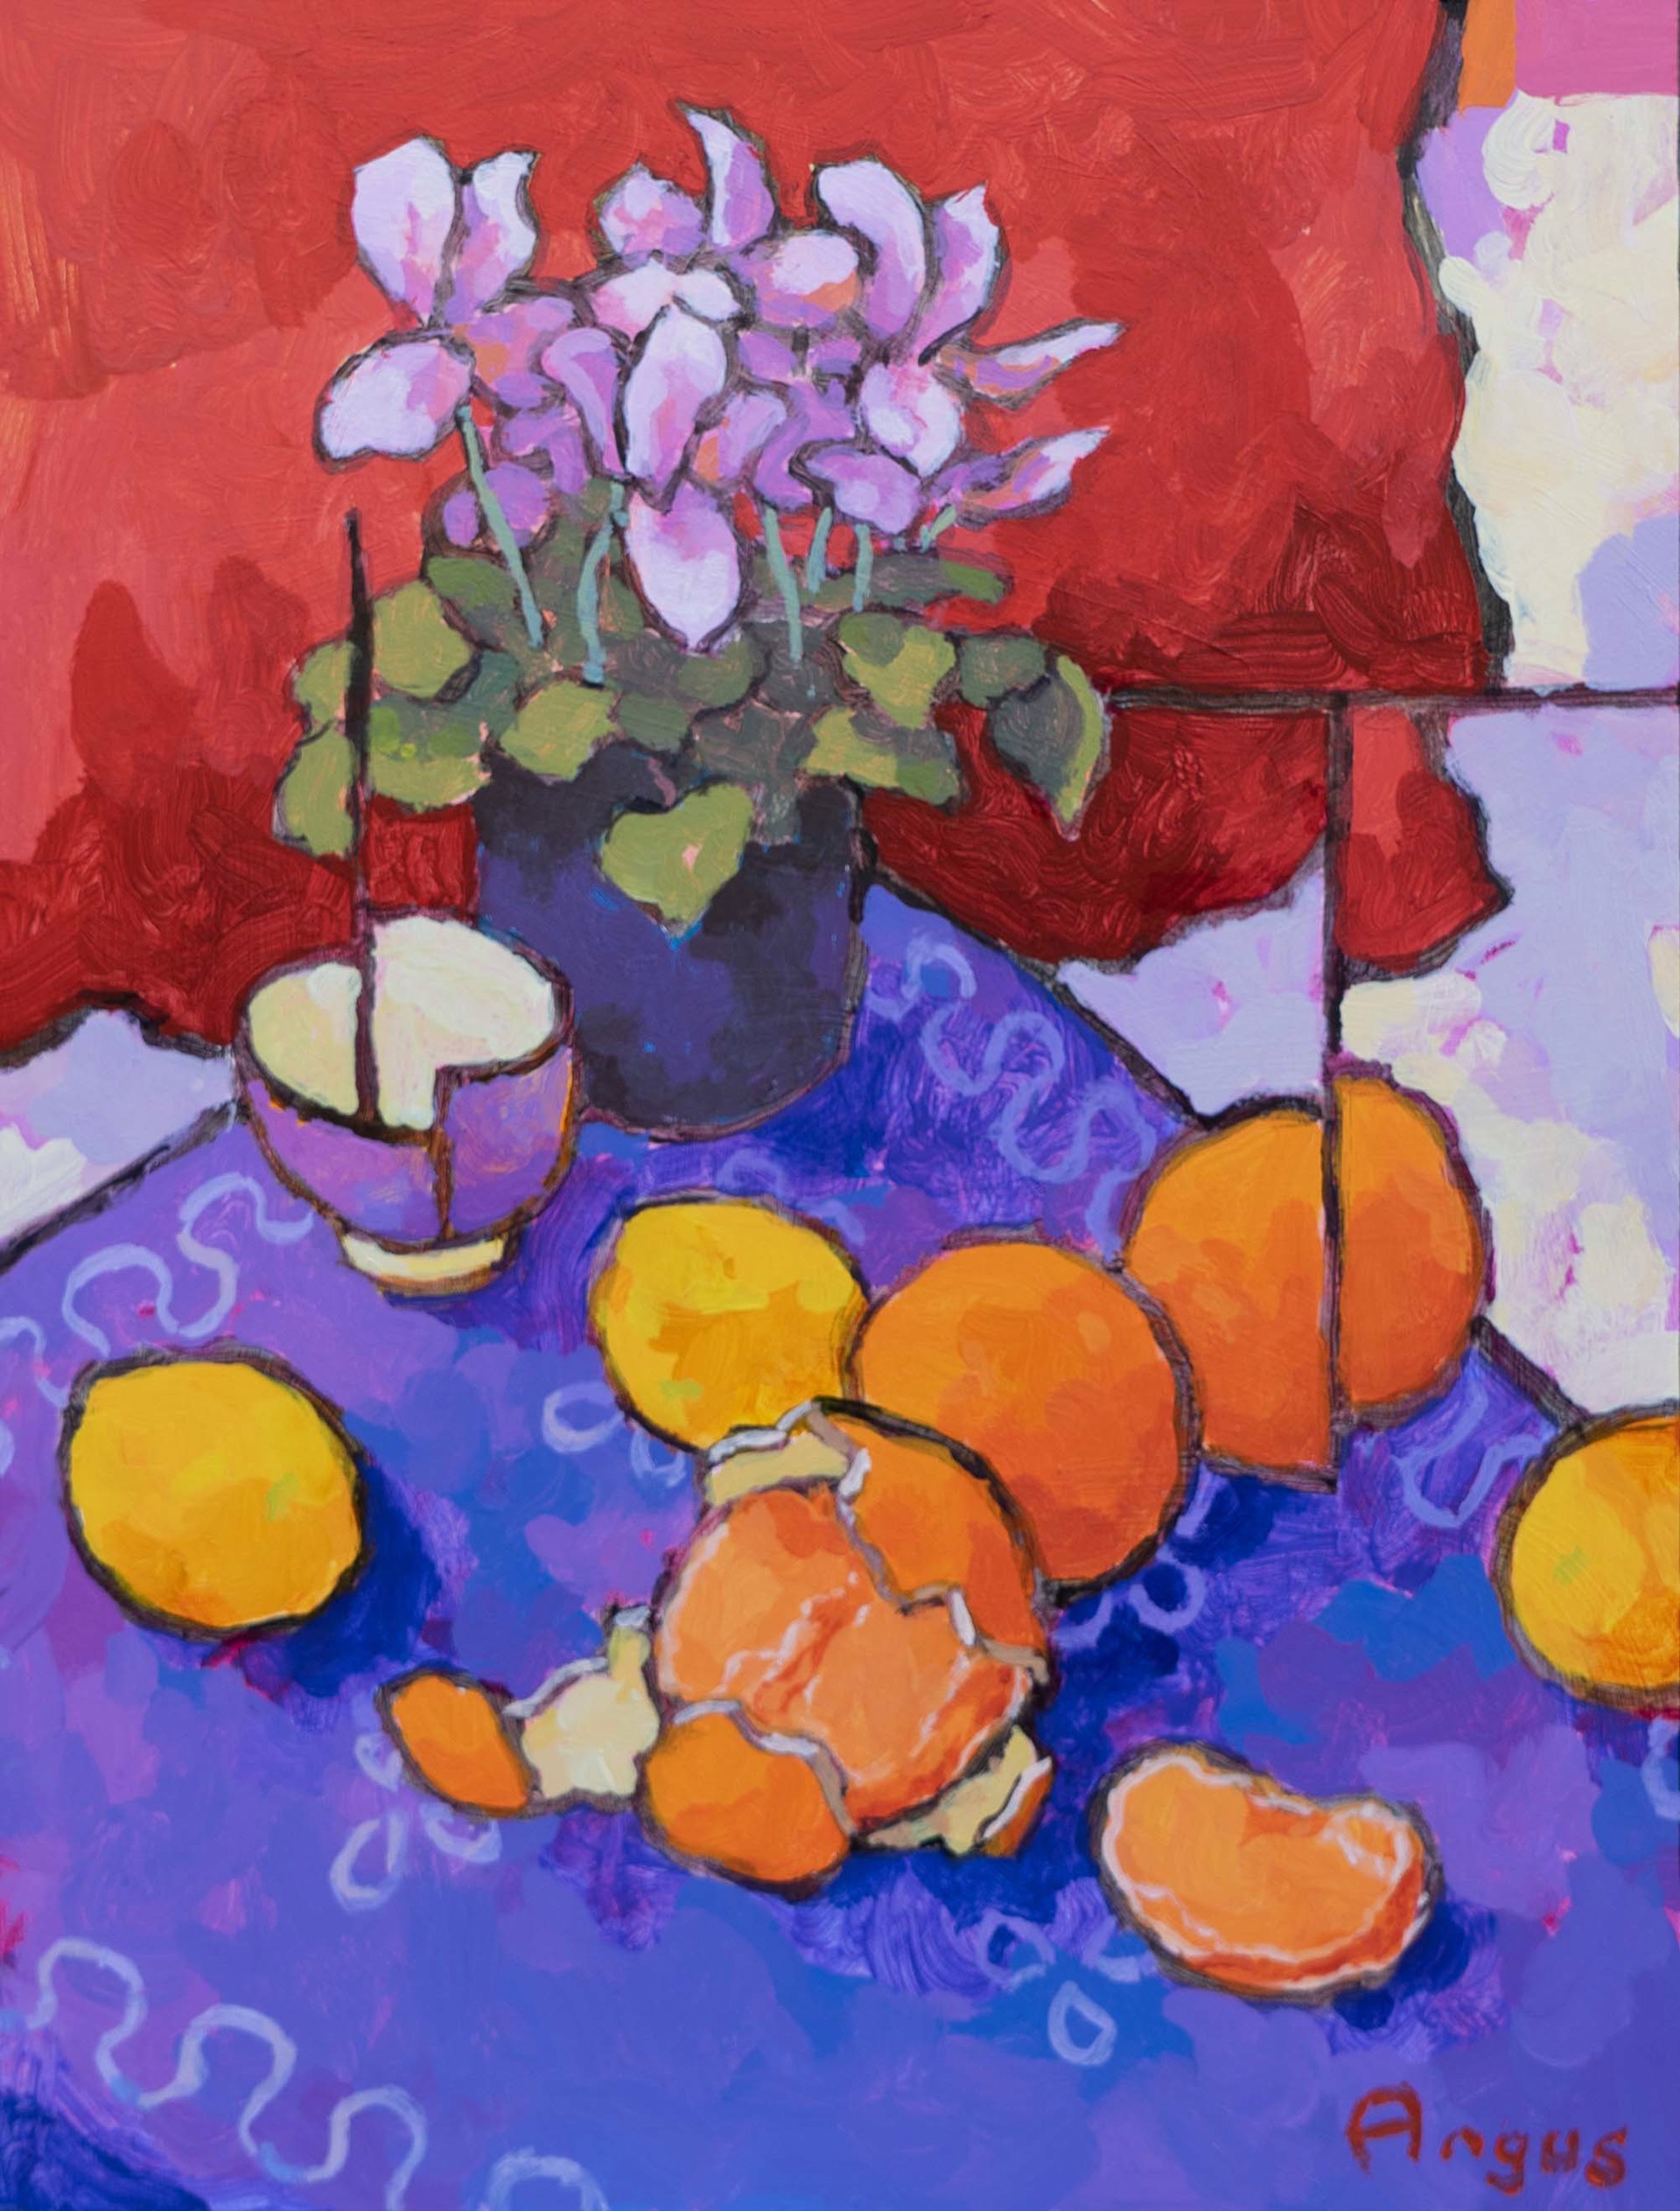 Small grouping of Oranges with Cyclamen by Angus